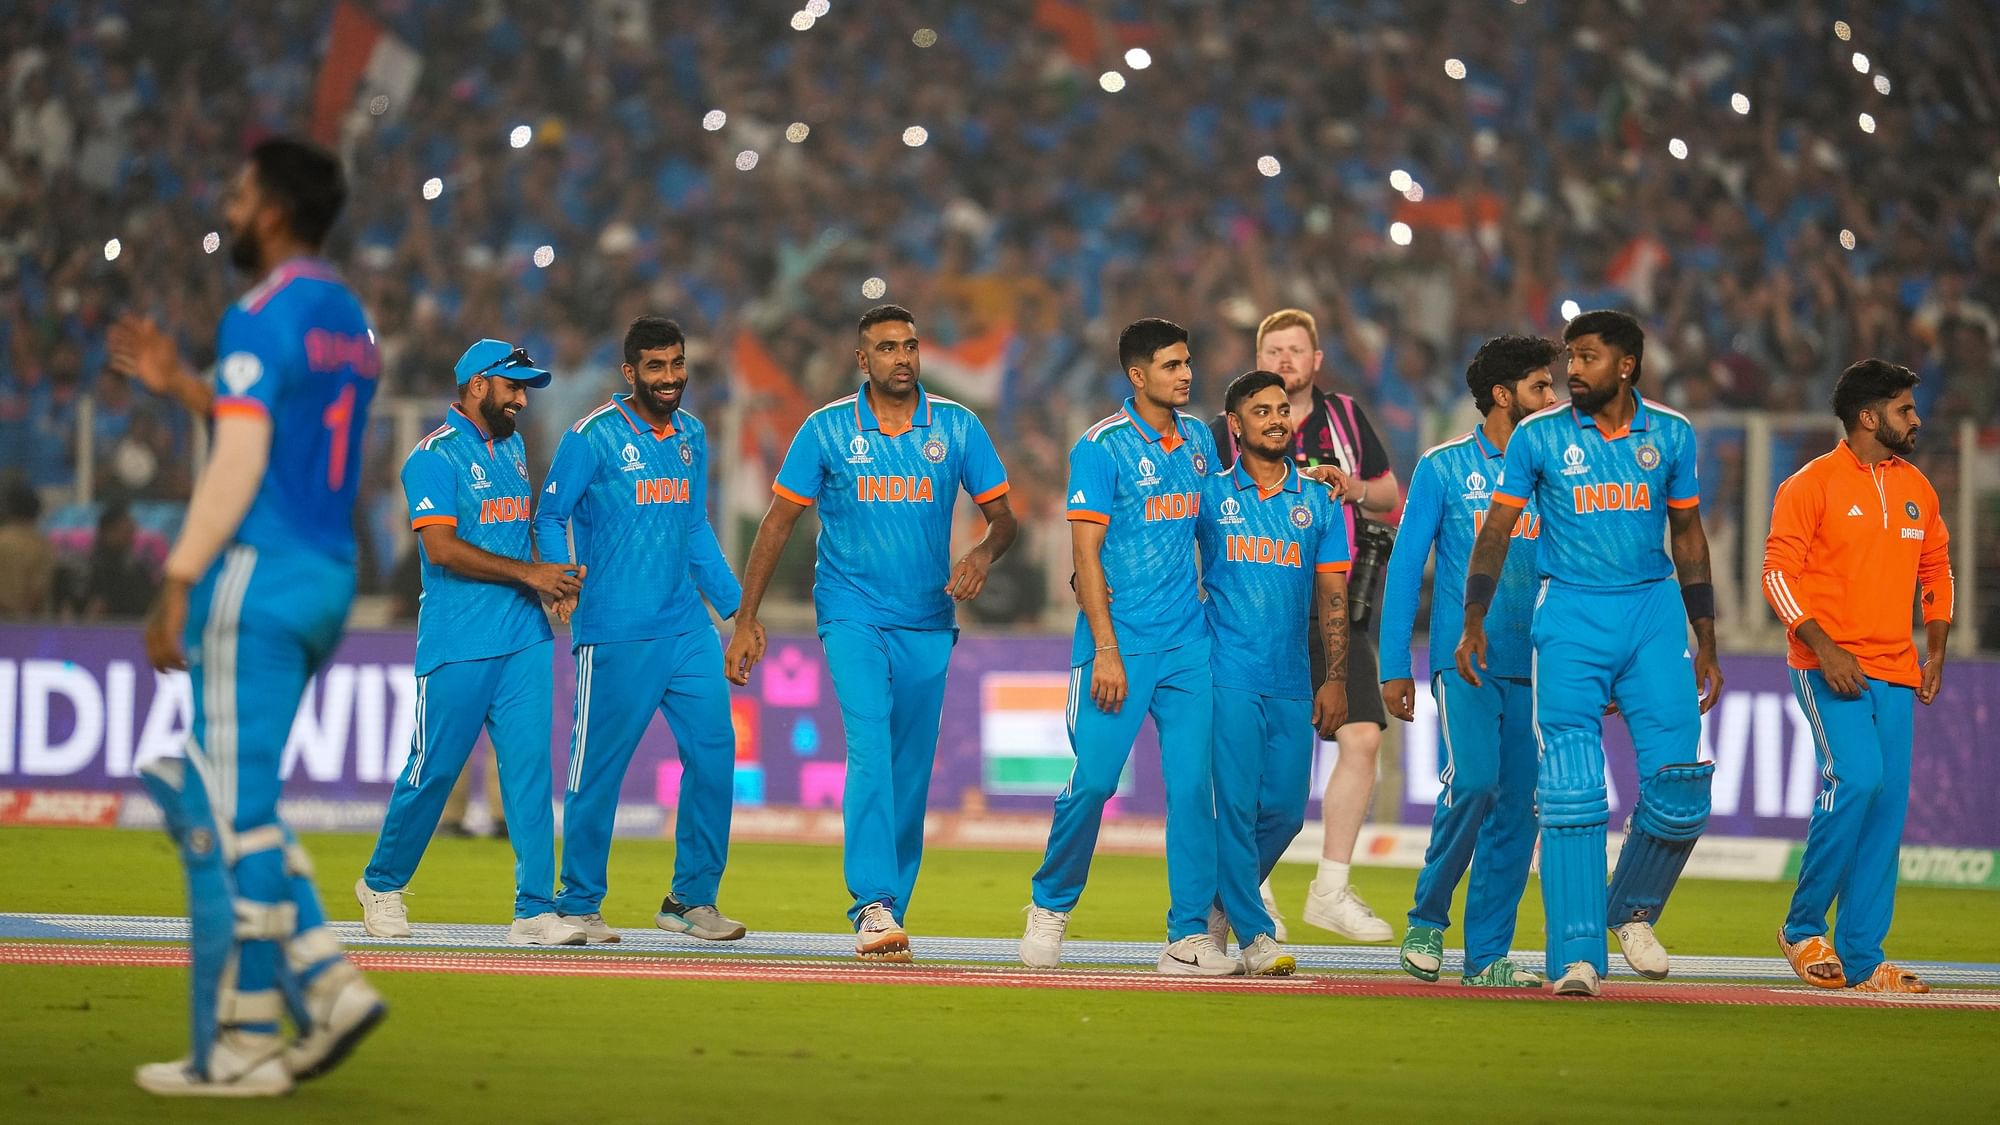 India May Not Travel to Pakistan for Champions Trophy: BCCI Sources